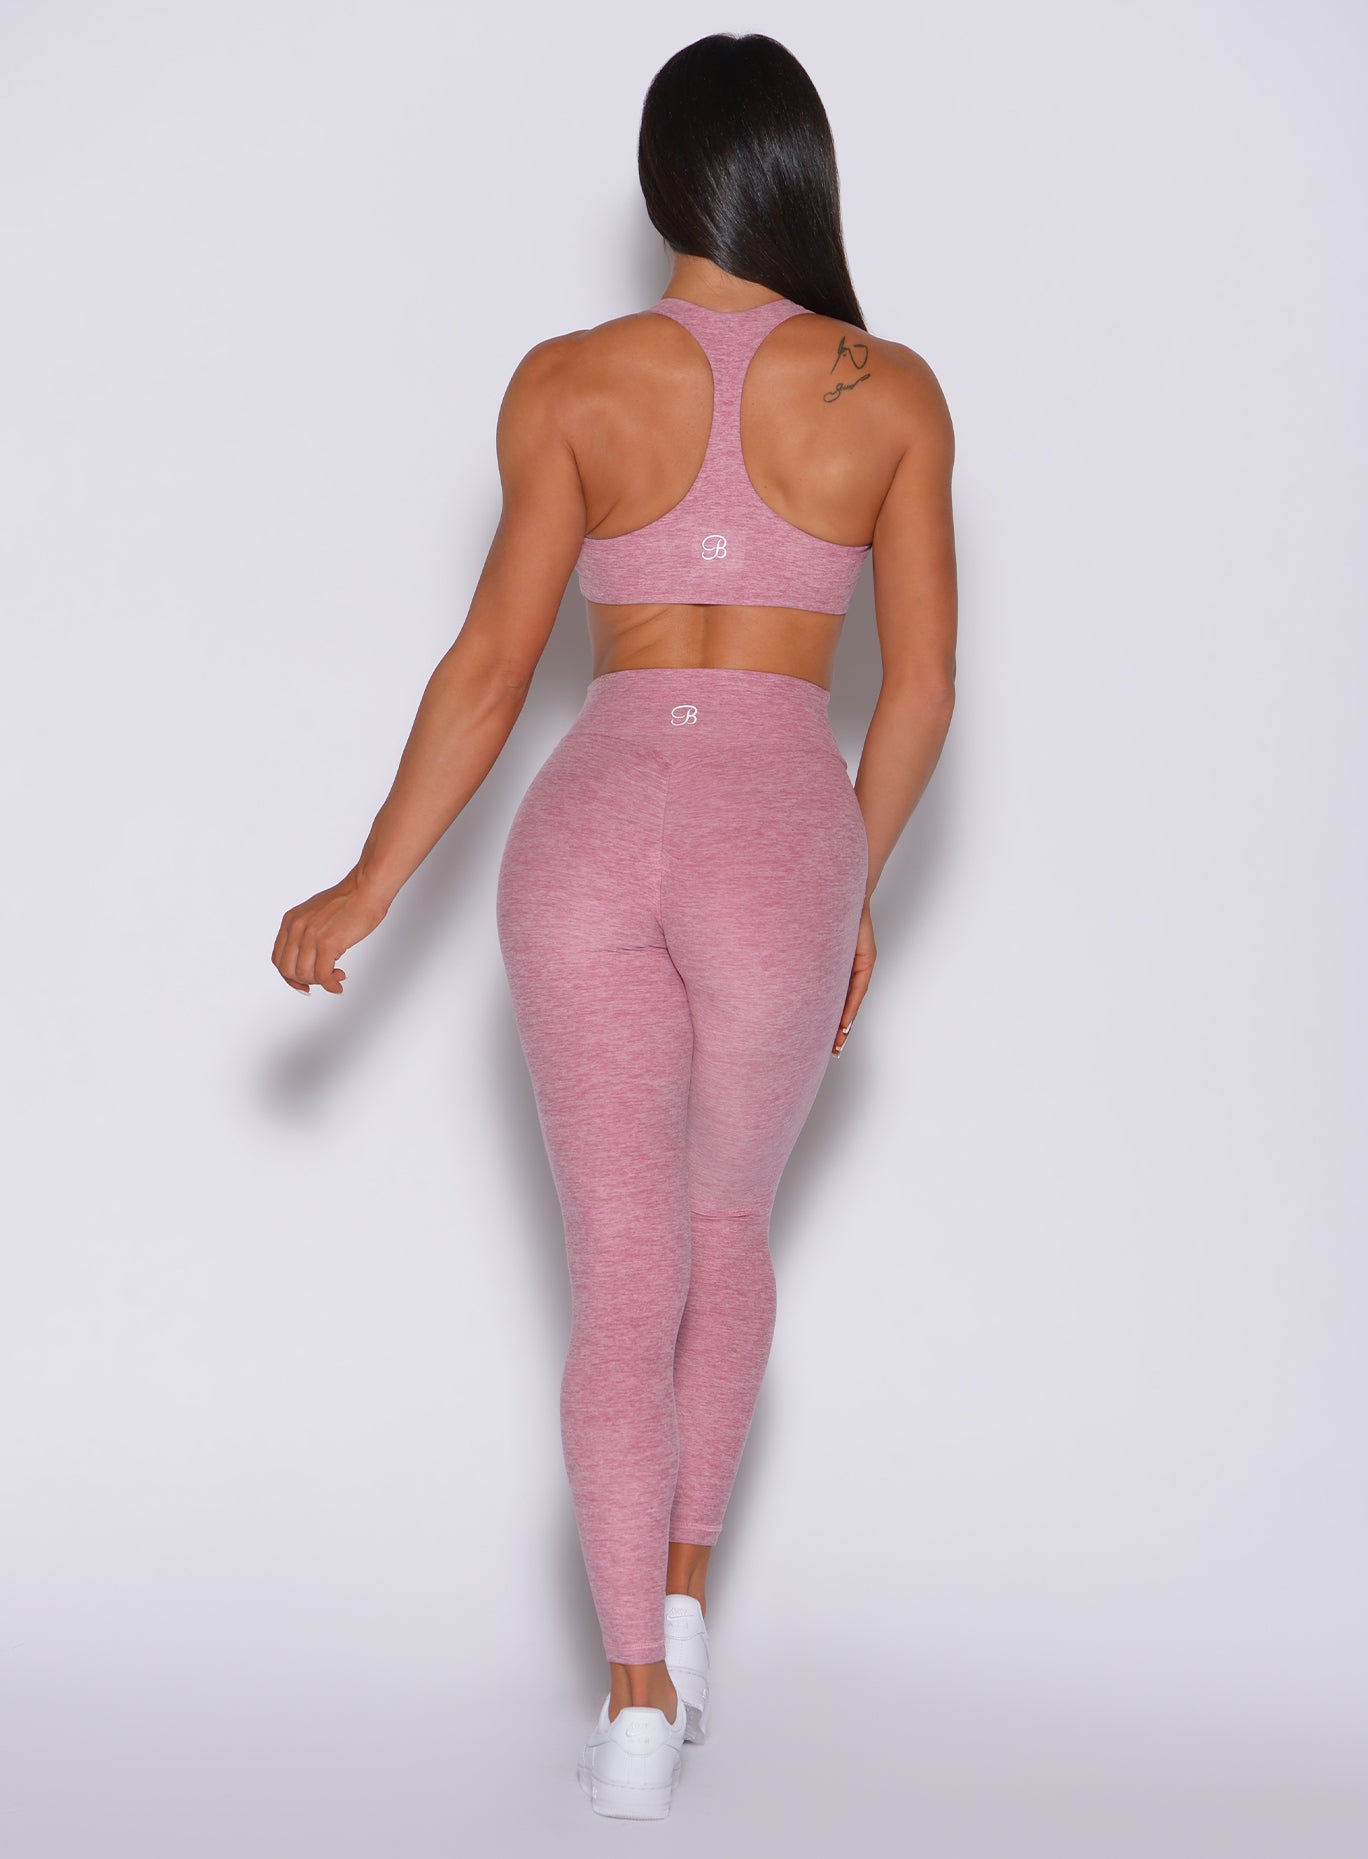 Back profile view of a model wearing our V scrunch leggings in rose blush color and a matching sports bra